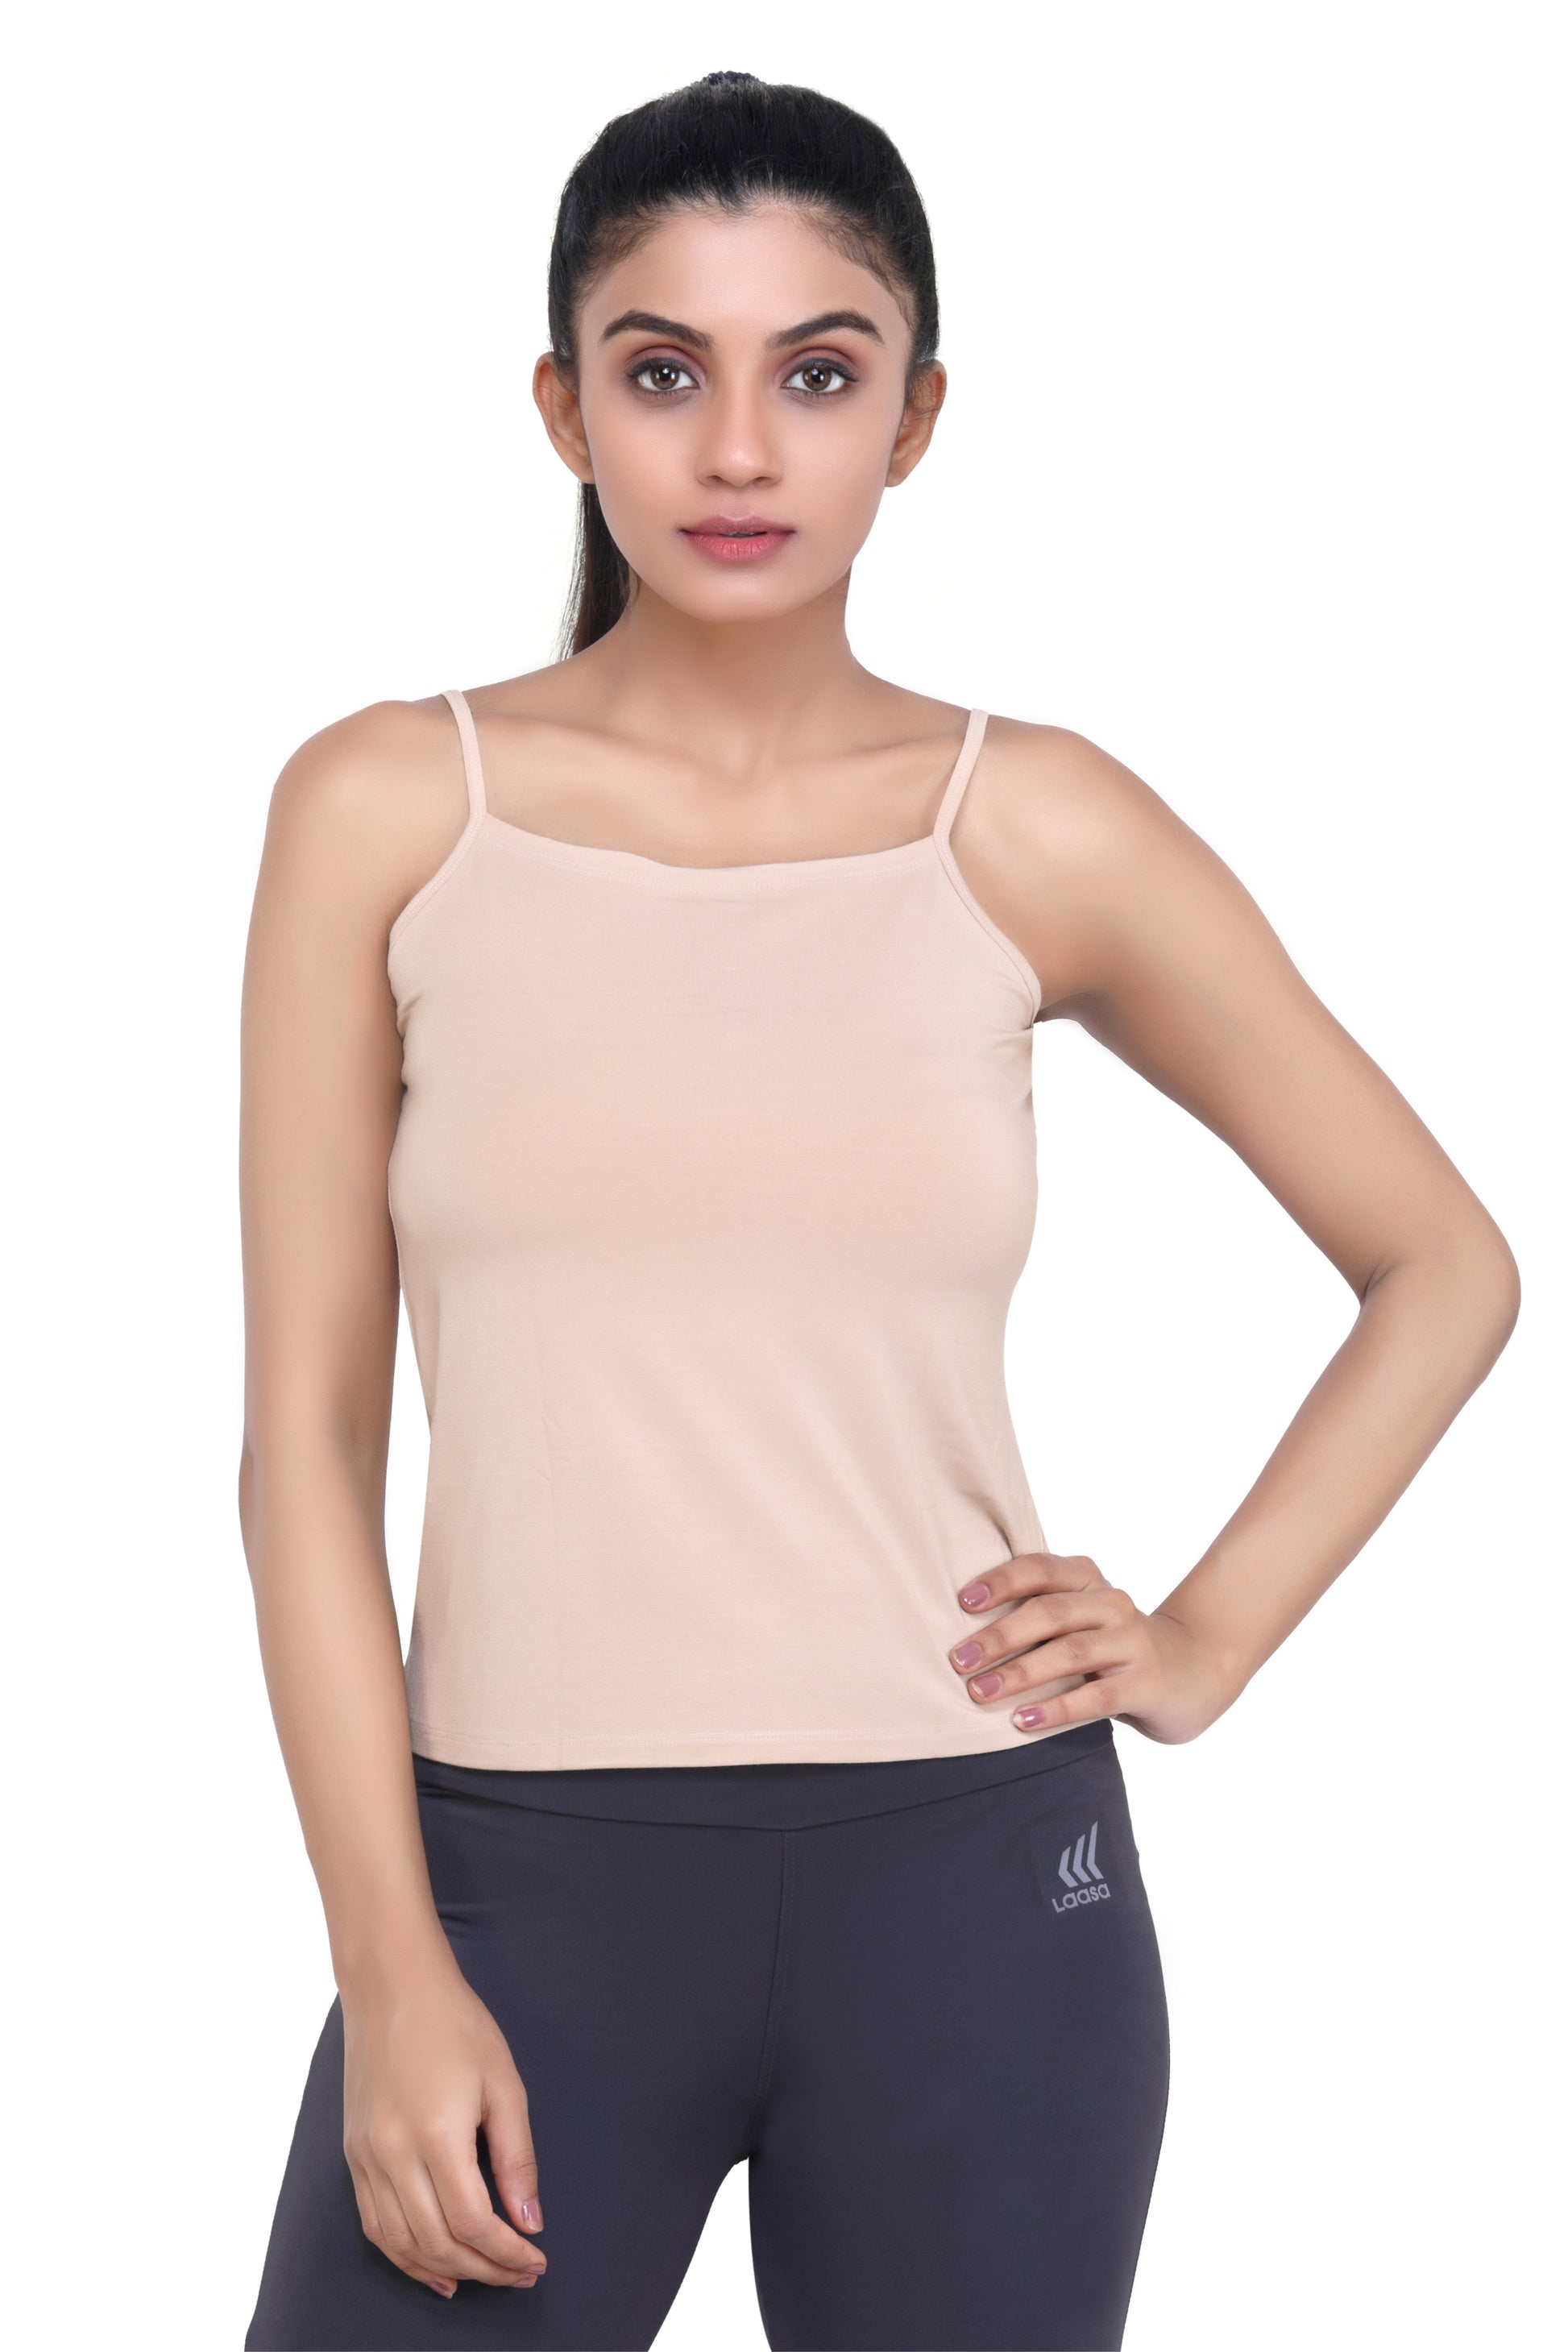 Camisoles and Inner Slips. Why Wear Them?